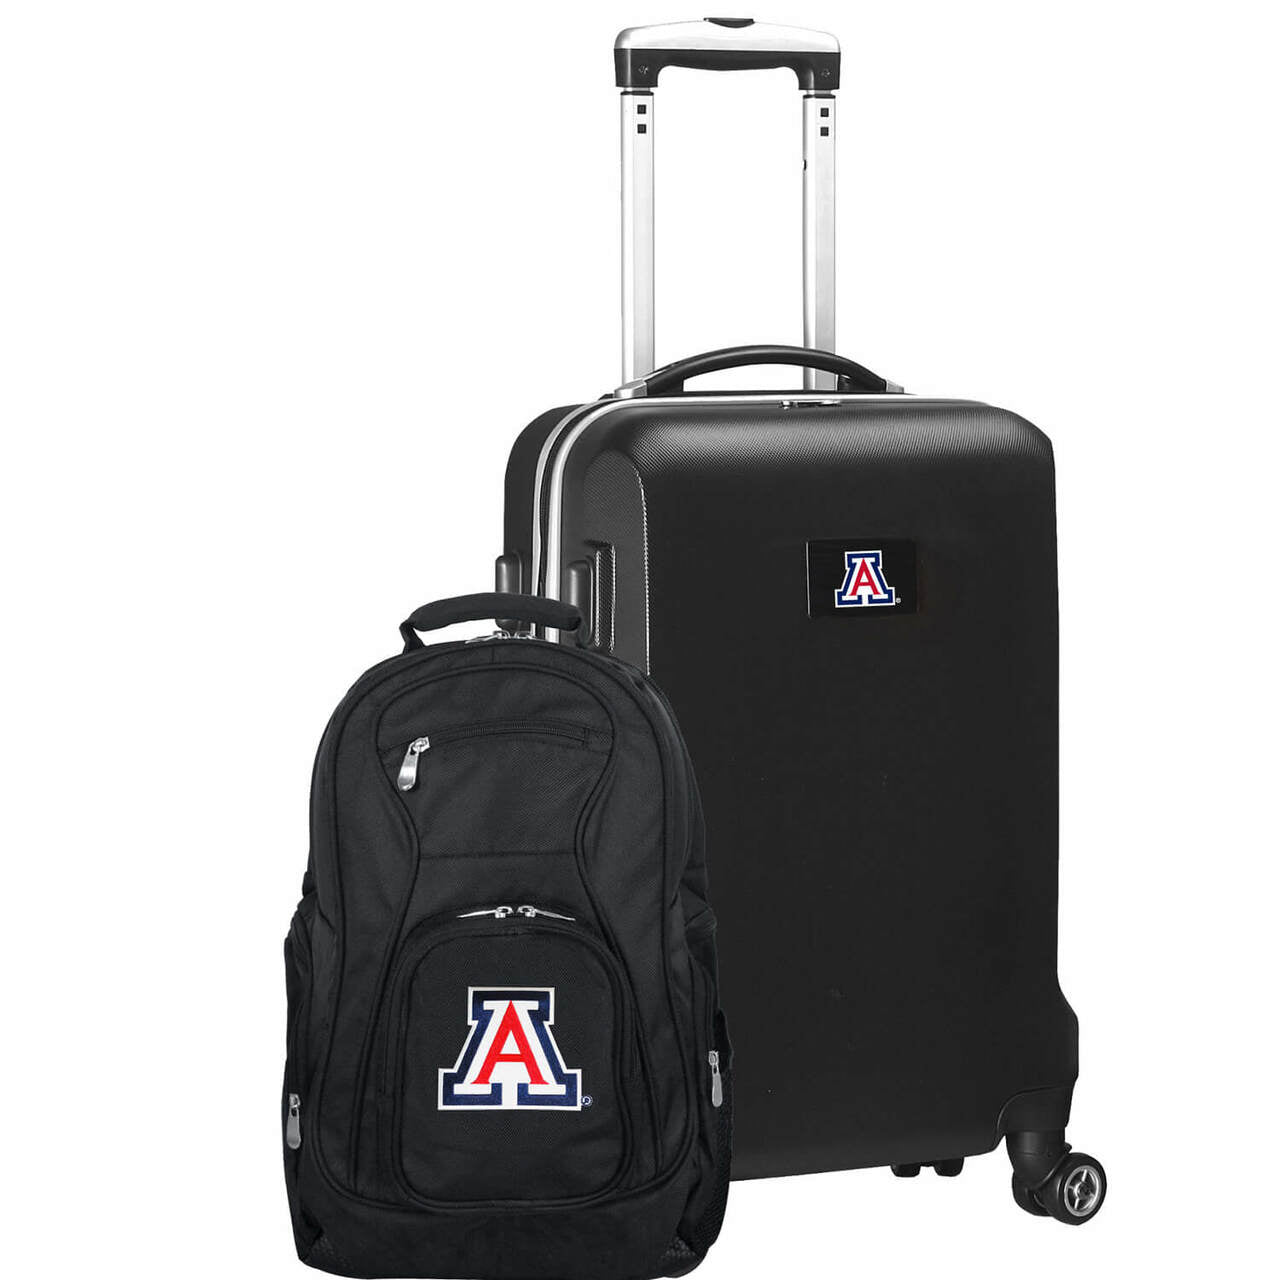 Arizona Wildcats Deluxe 2-Piece Backpack and Carry on Set in Black